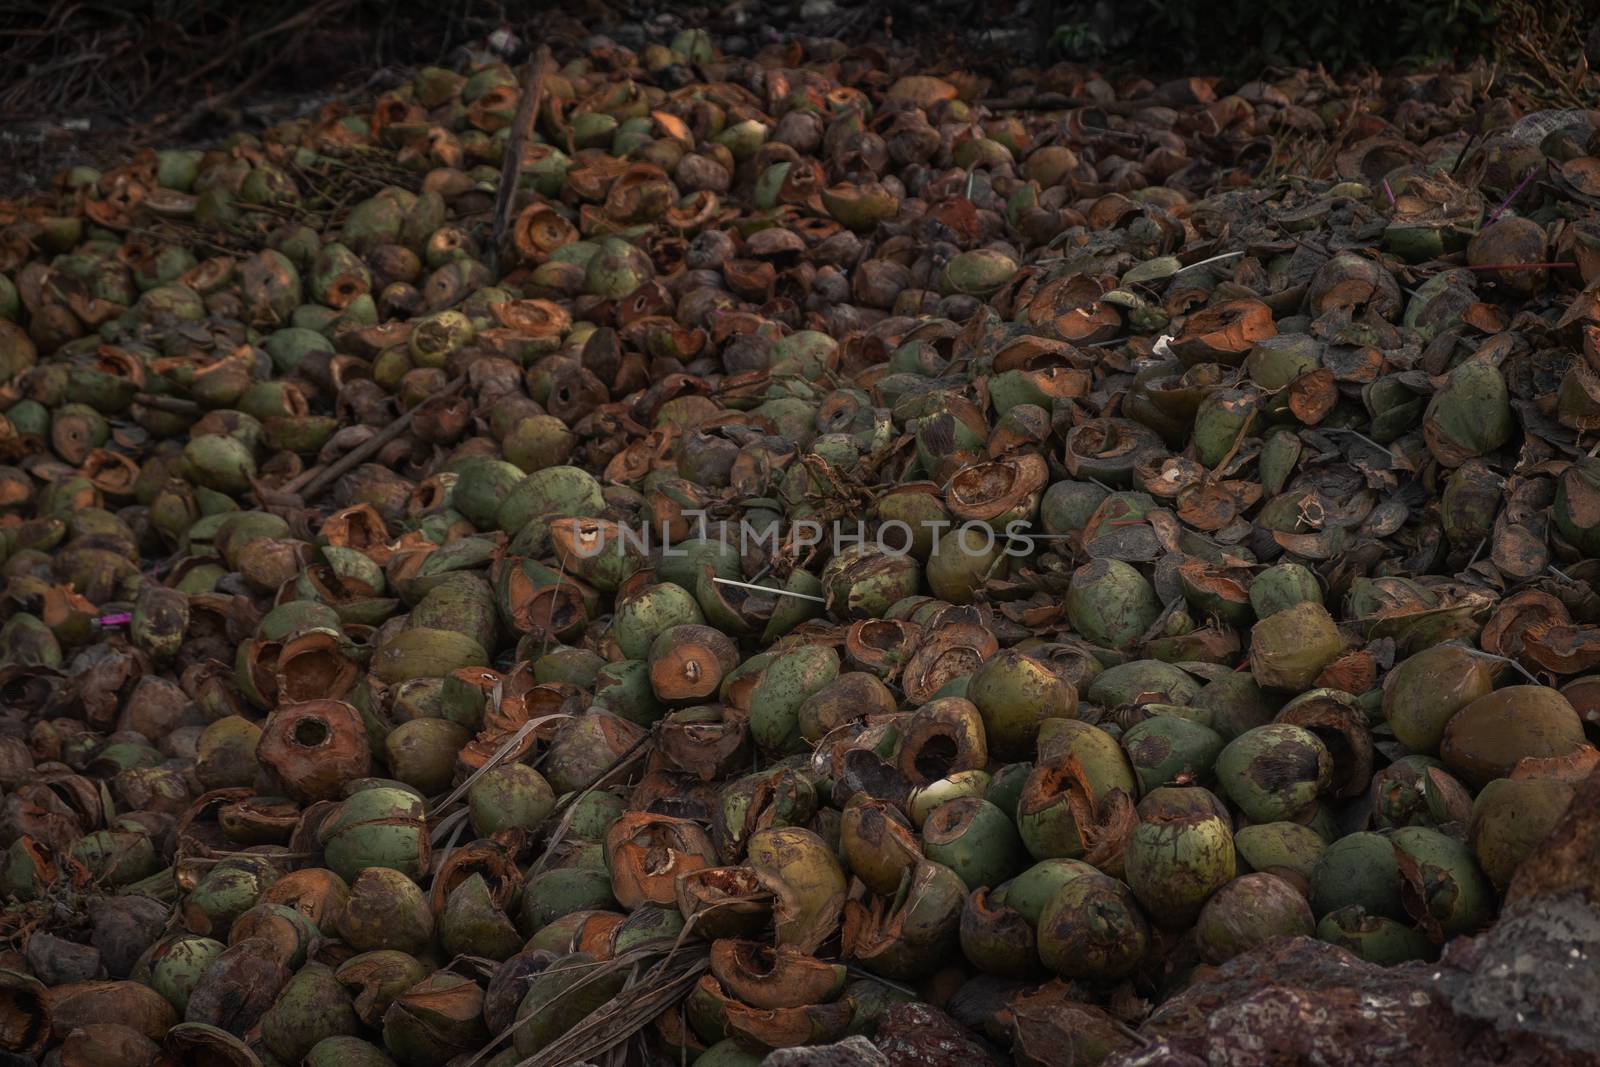 Husks of coconuts by snep_photo